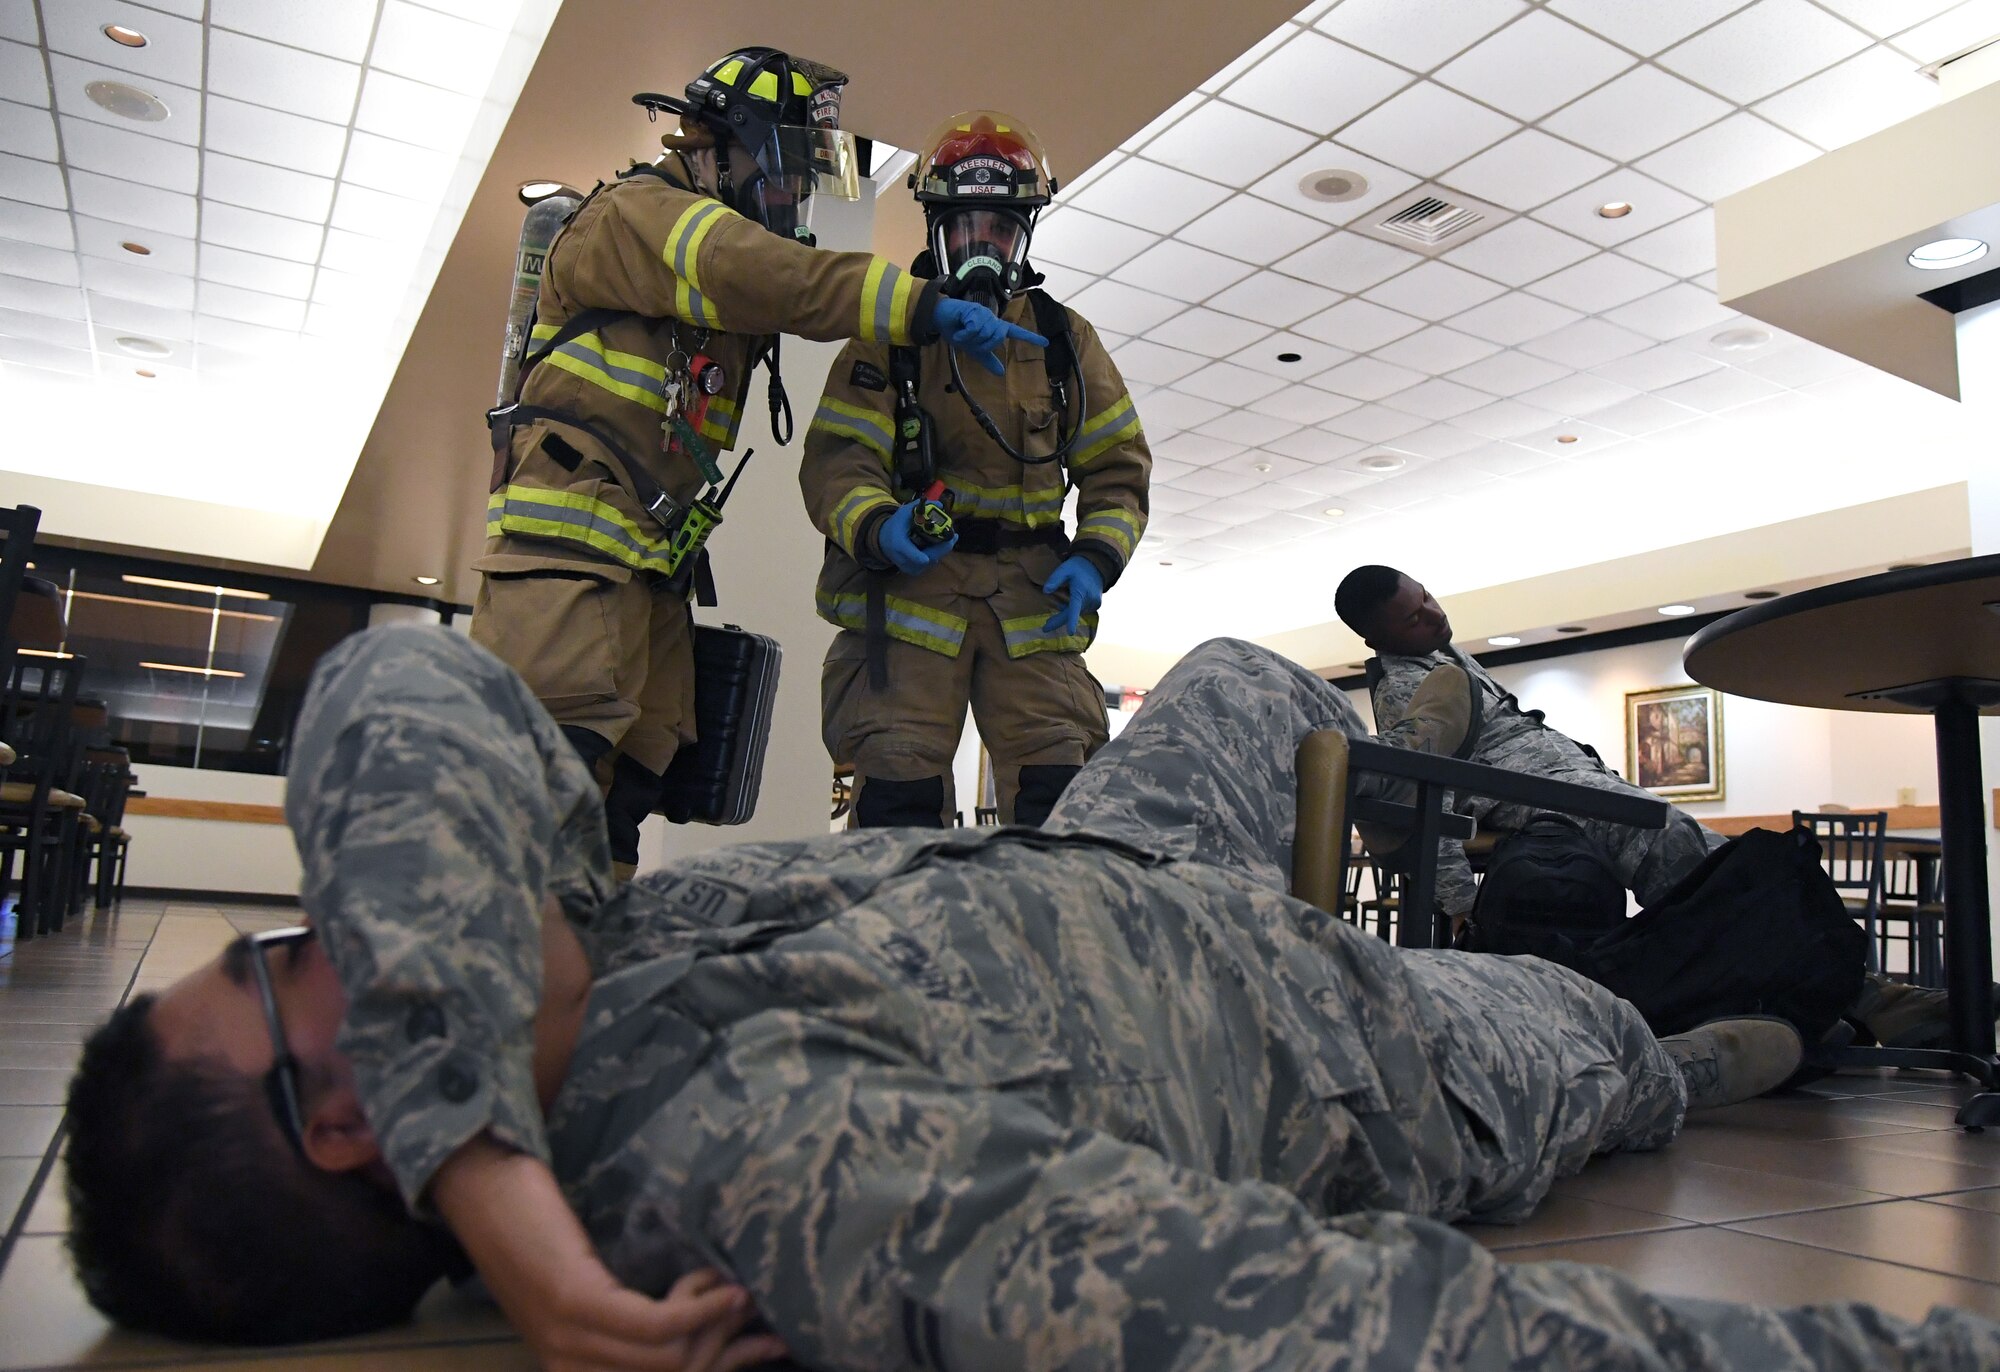 Christopher Oliver and David Cleland, 81st Infrastructure Division firefighters, assess the scene during the Anti-Terrorism, Force Protection Condition and Chemical, Biological, Radiological, Nuclear and high-yield Explosives training exercise near the Live Oak Dining Facility at Keesler Air Force Base, Mississippi, Oct. 24, 2019. The exercise scenario simulated a gym bag with ricin found by Keesler personnel who alerted first responders. The exercise was conducted to evaluate the mission readiness and security of Keesler. (U.S. Air Force photo by Kemberly Groue)